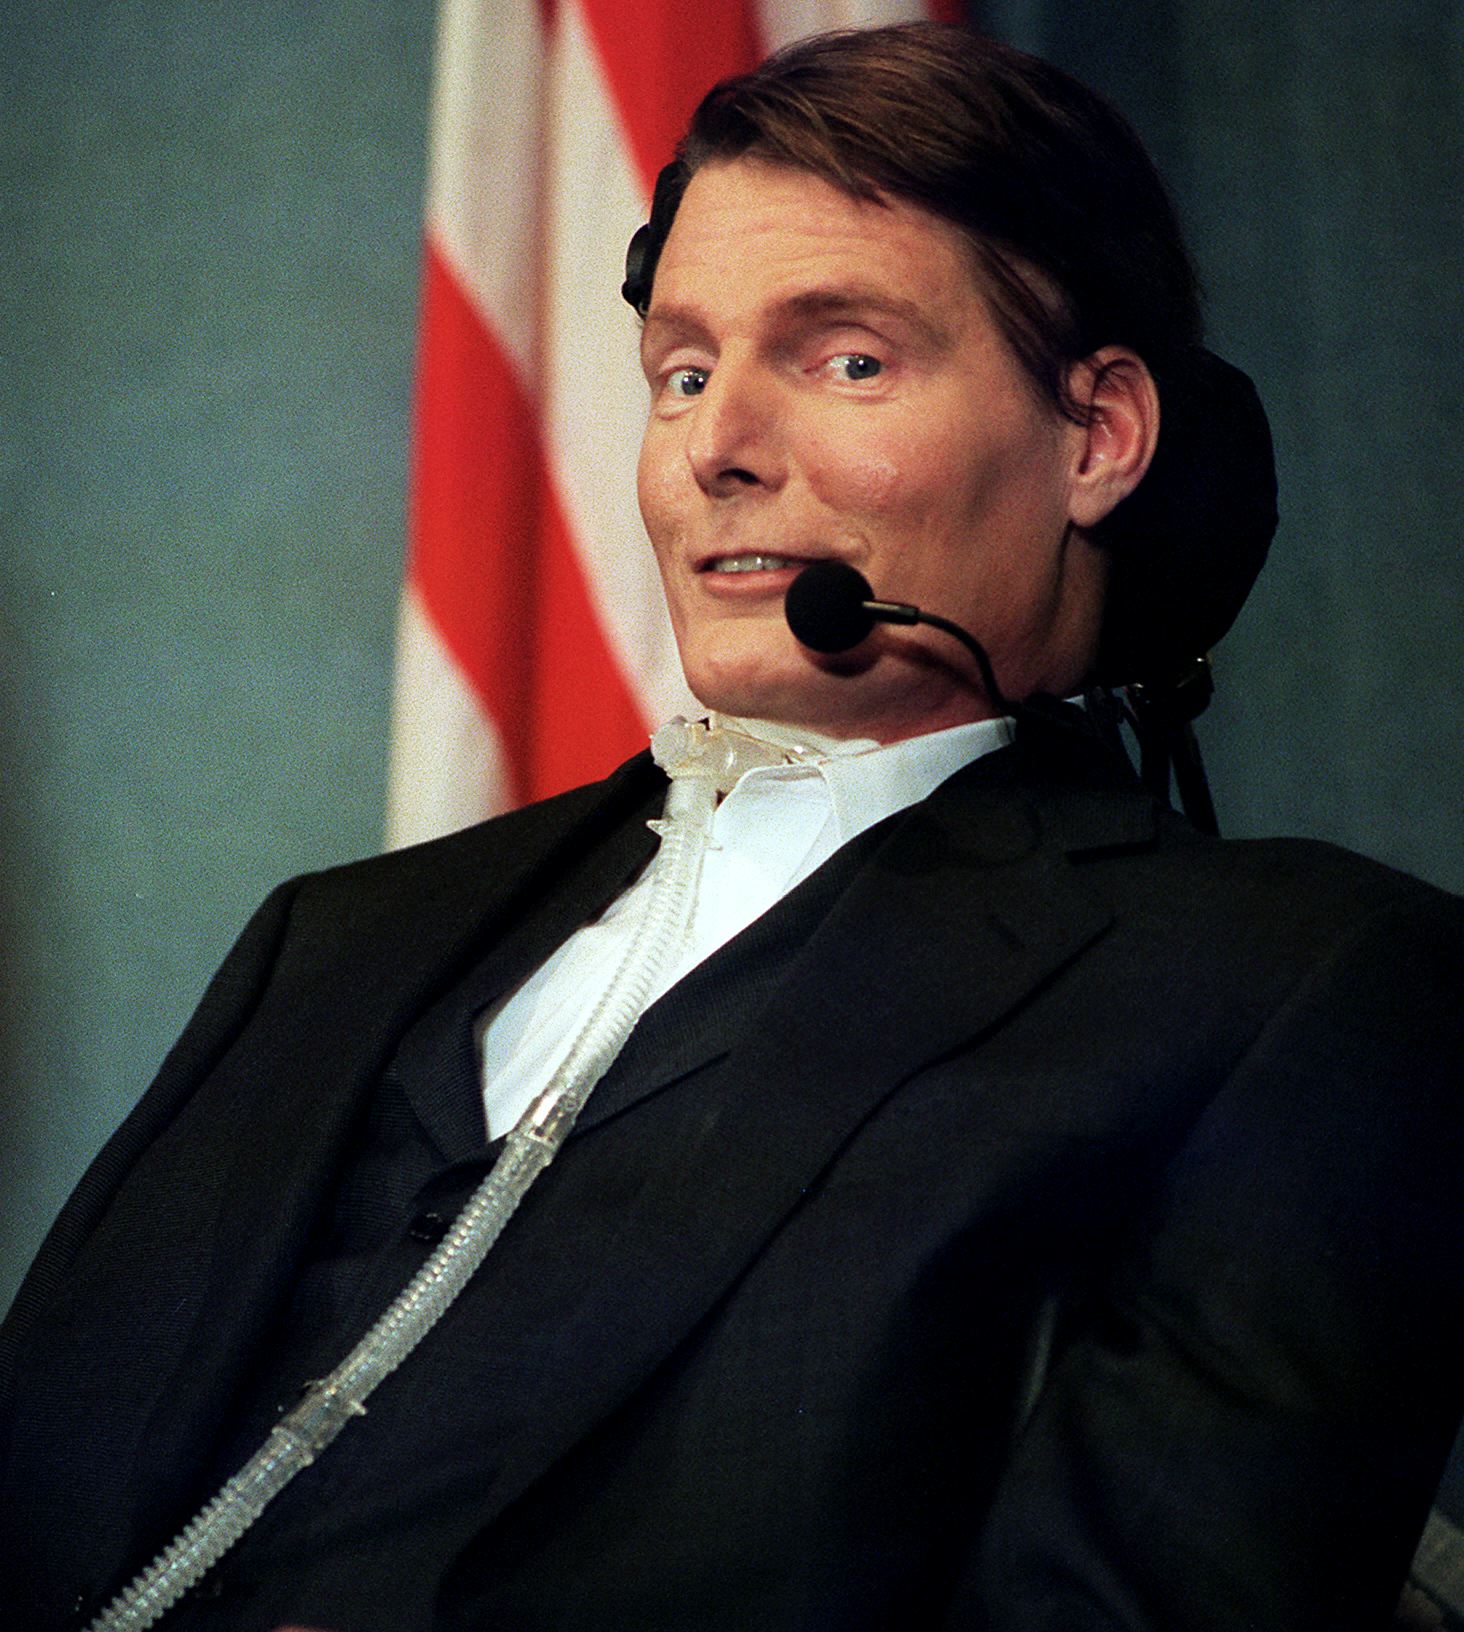 Actor Christopher Reeves, a quadriplegic and disabilities rights activist, addresses an audience at the National Press Club in Washington, DC on December, 1, 1999. | Source: Getty Images